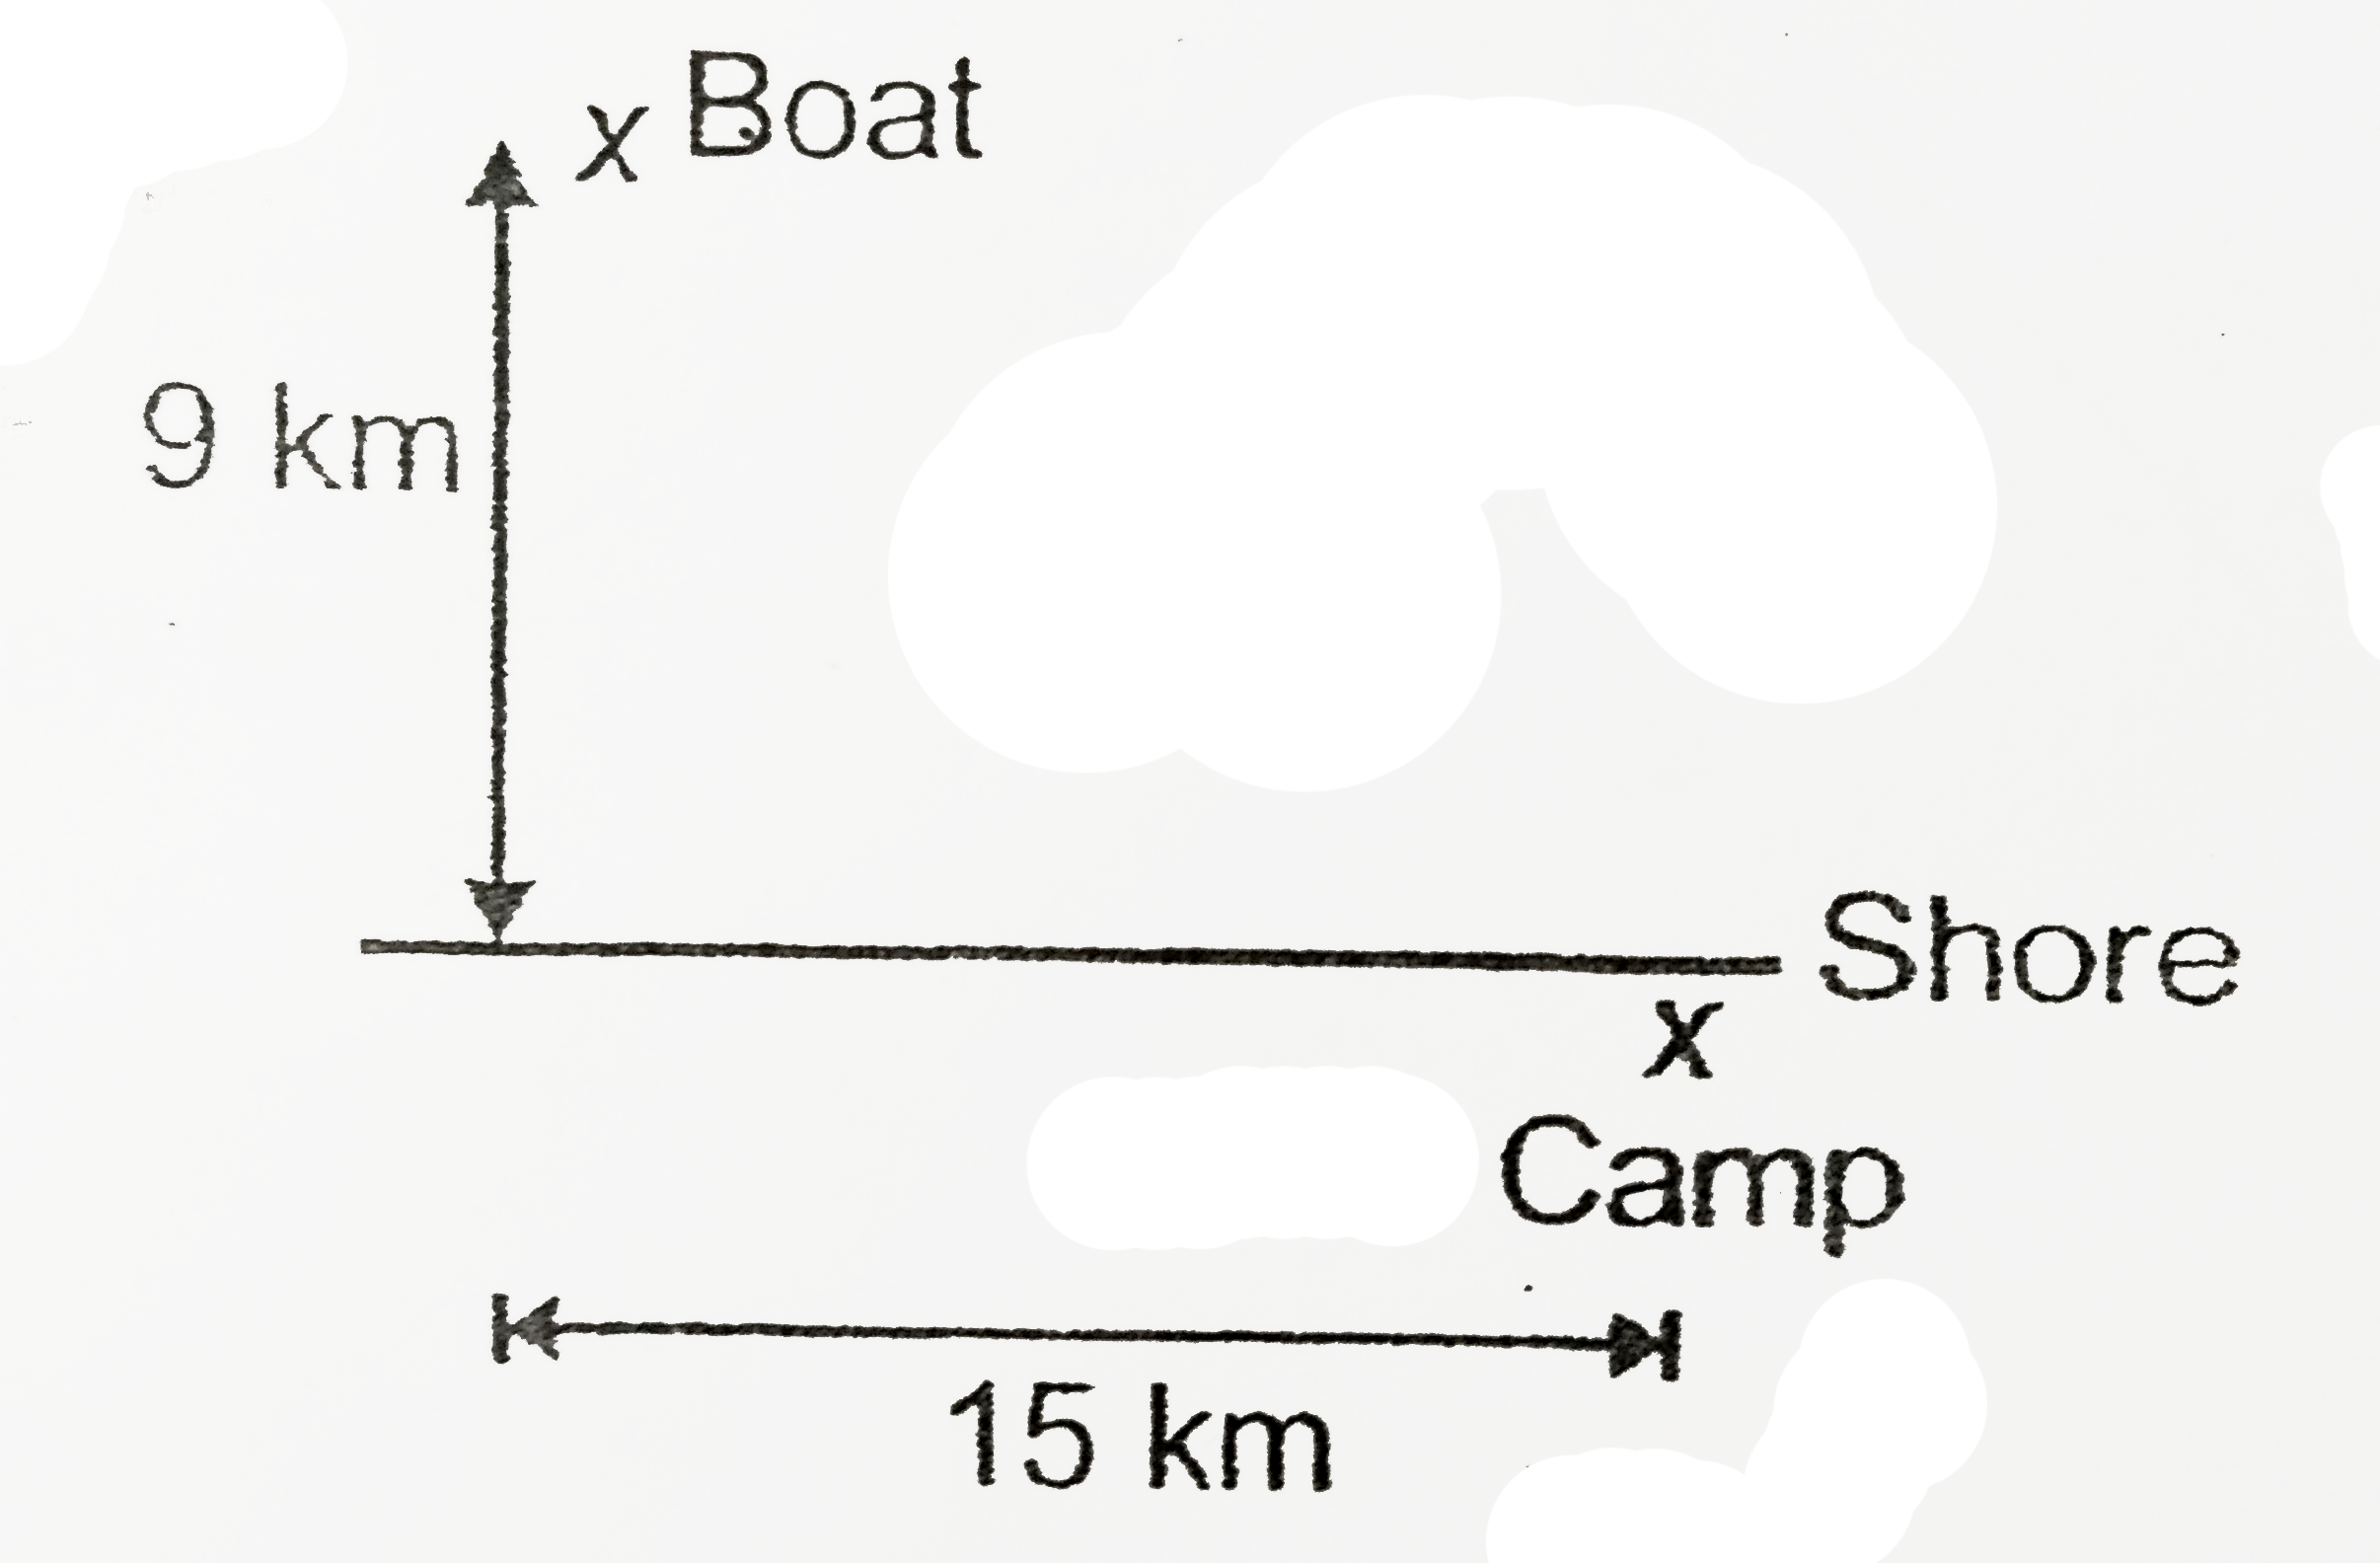 A fishing boat is anchored 9 km away from the the nearest point on the shore. A messanger must be sent from the fishing boat to a camp, 15 km from the point on shore closest to boat. If the messanger can walk at a speed of 5 km per hour and can row at 4 km/h. determine the distance of that point (in km) from the shore, where he must land so as to reach the shore in least possible time.